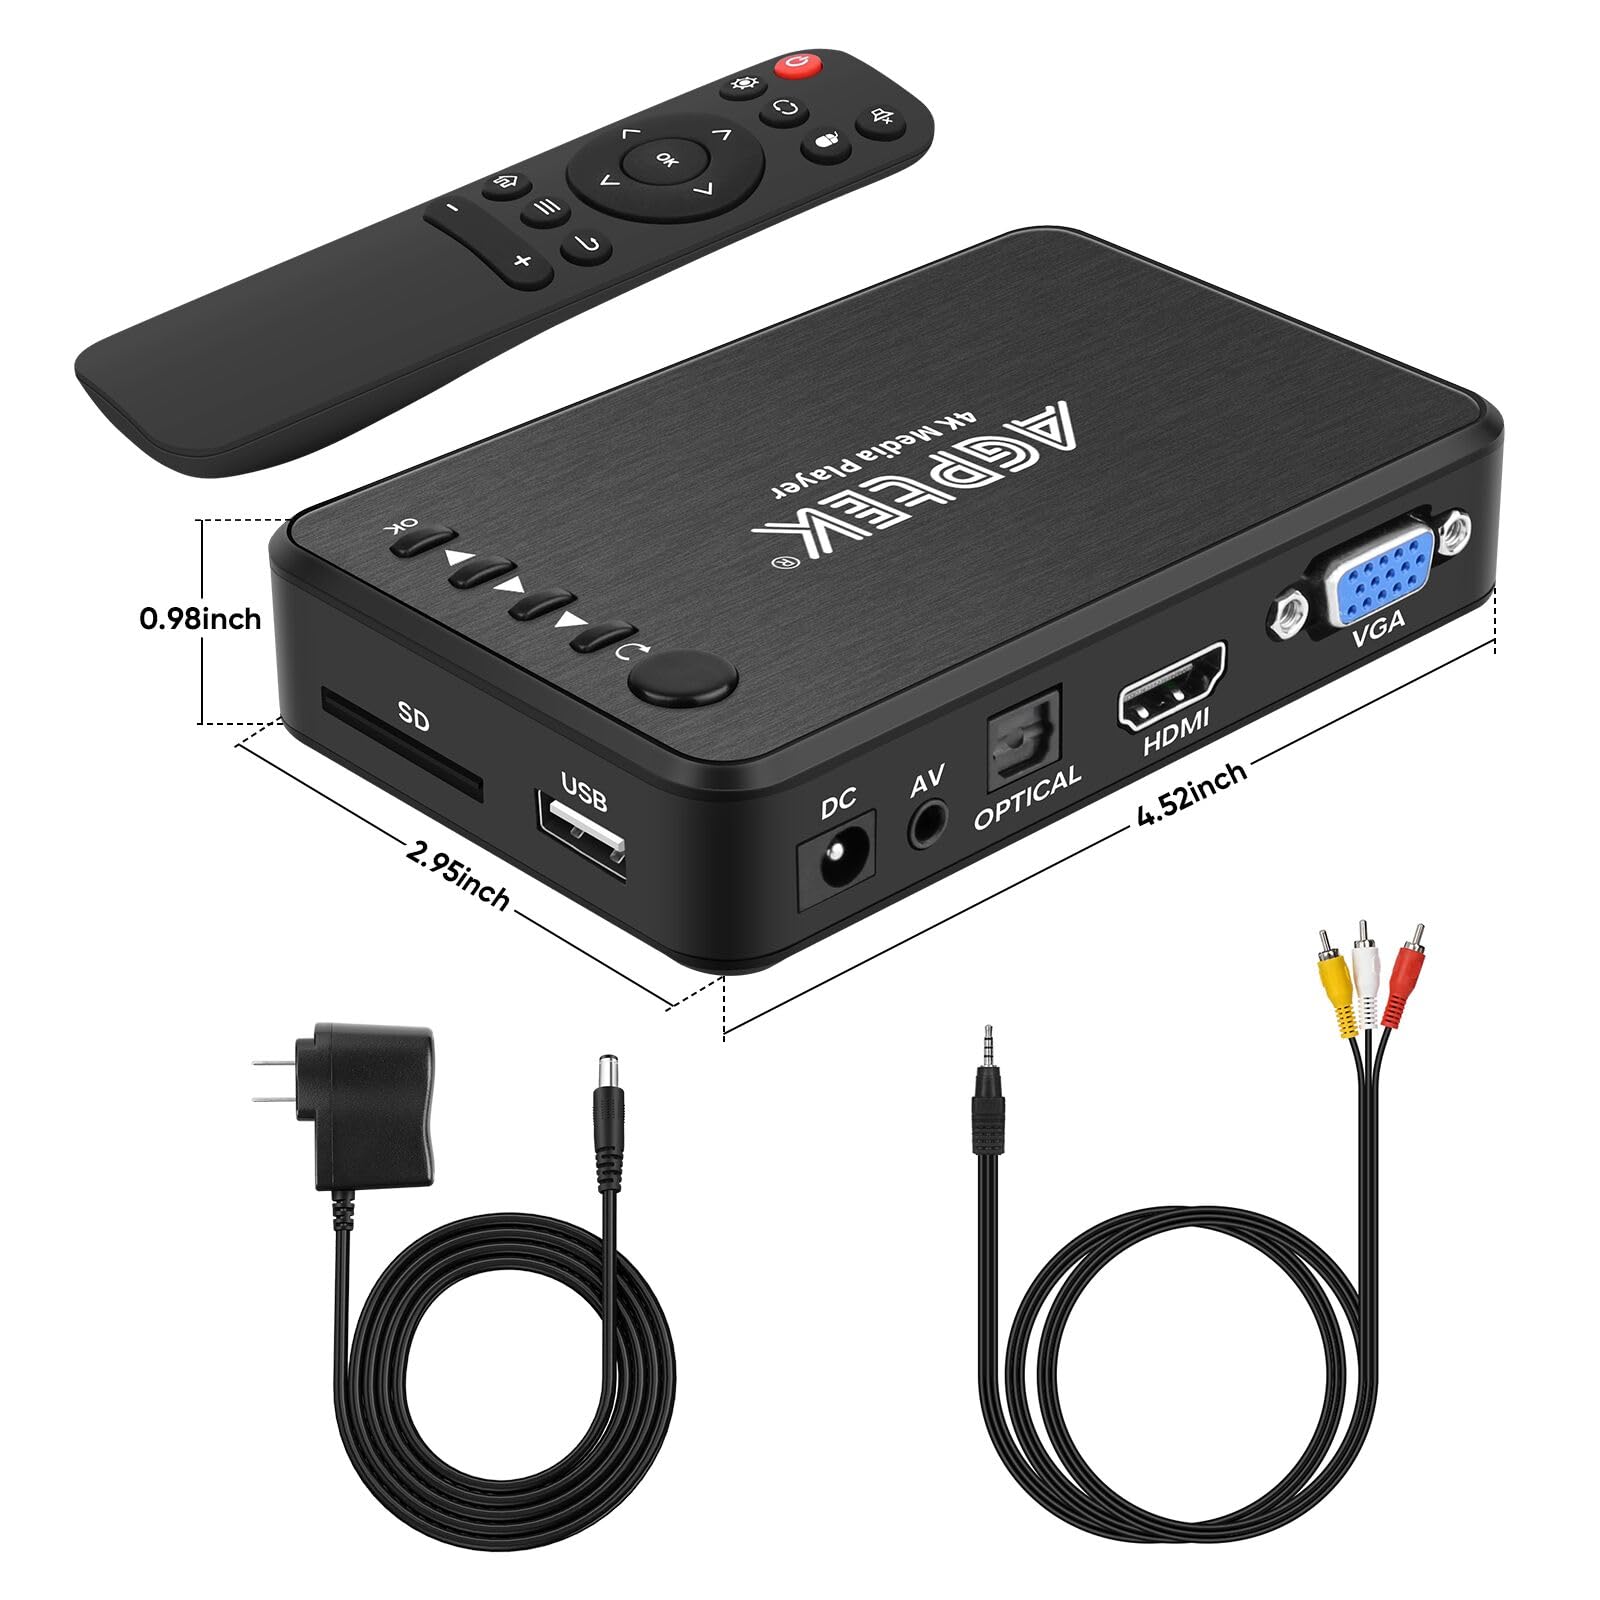 AGPTEK Updated 4K@30hz HDMI TV Media Player with HDMI/AV/VGA Output, Digital MP4 Player for 14TB HDD/ 256G USB Drive/SD Card/H.265 MP4, with Remote Control for MP3 AVI RMVB MPEG etc